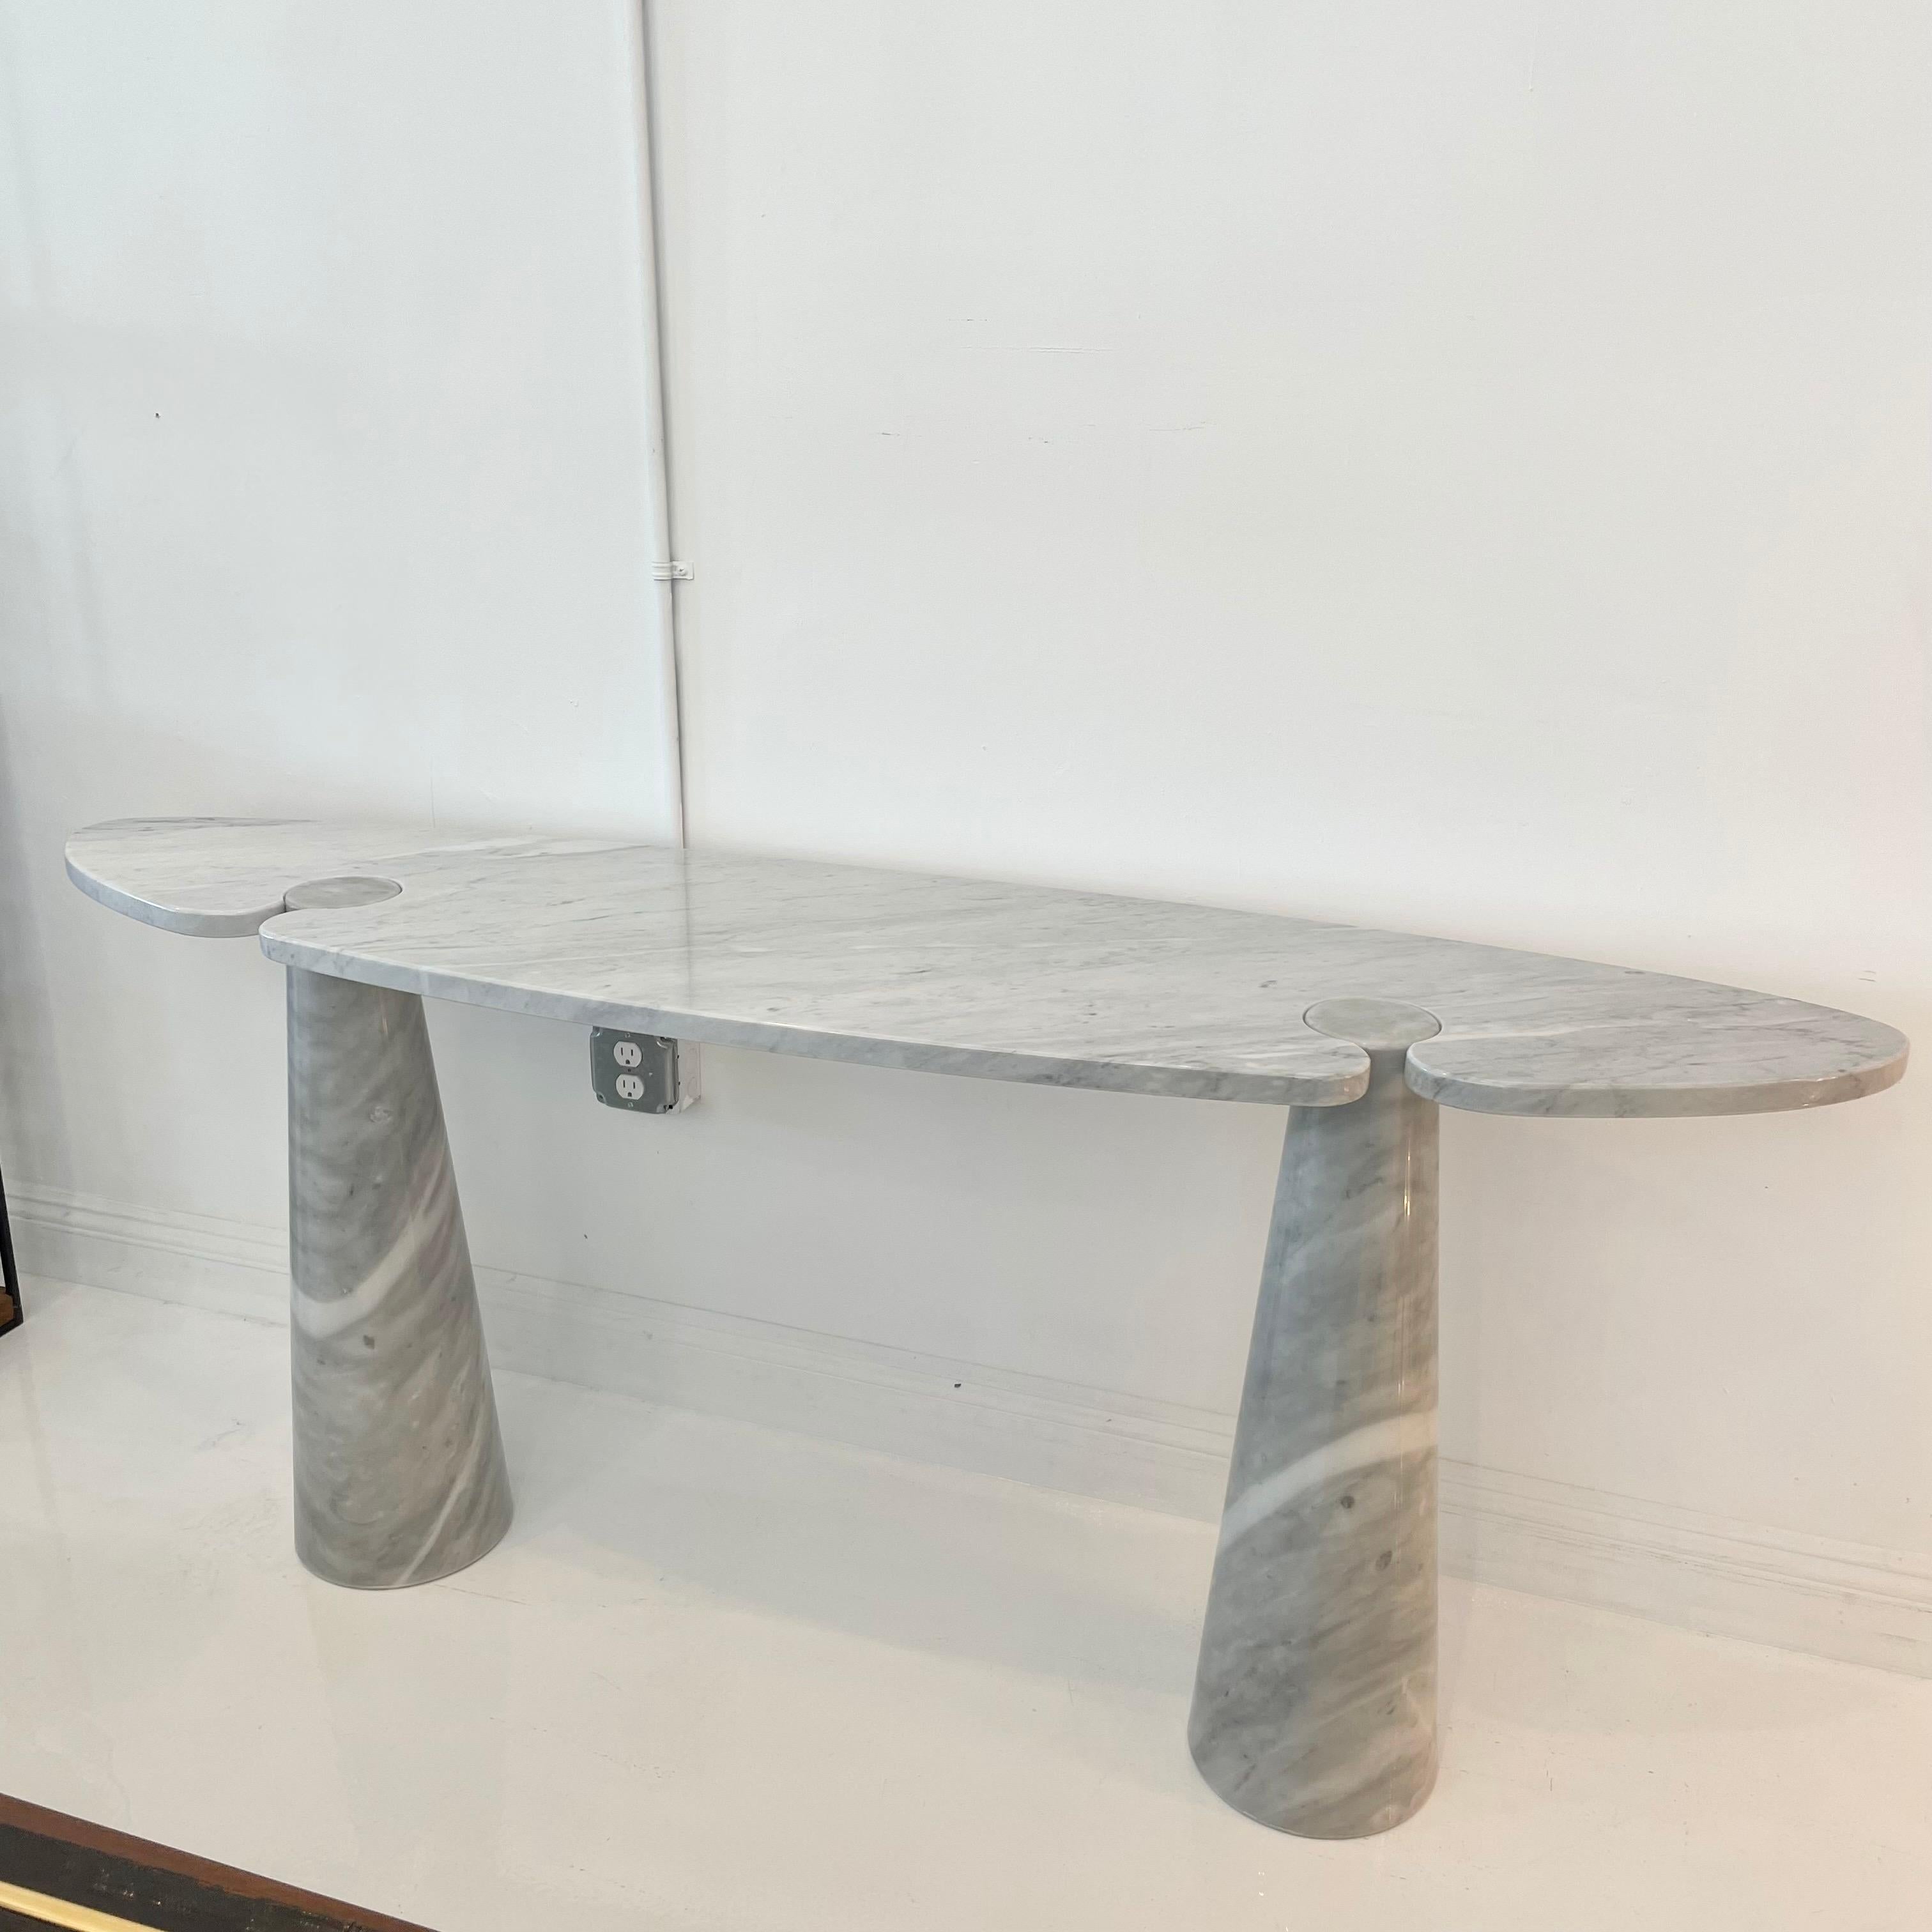 Elegant Carrara marble console table by Angelo Mangiarotti. Timeless style and simplicity as well as beautiful raw materials are what make this piece so special and sought after. Perfect to elevate any space. White and blue/grey veins run throughout